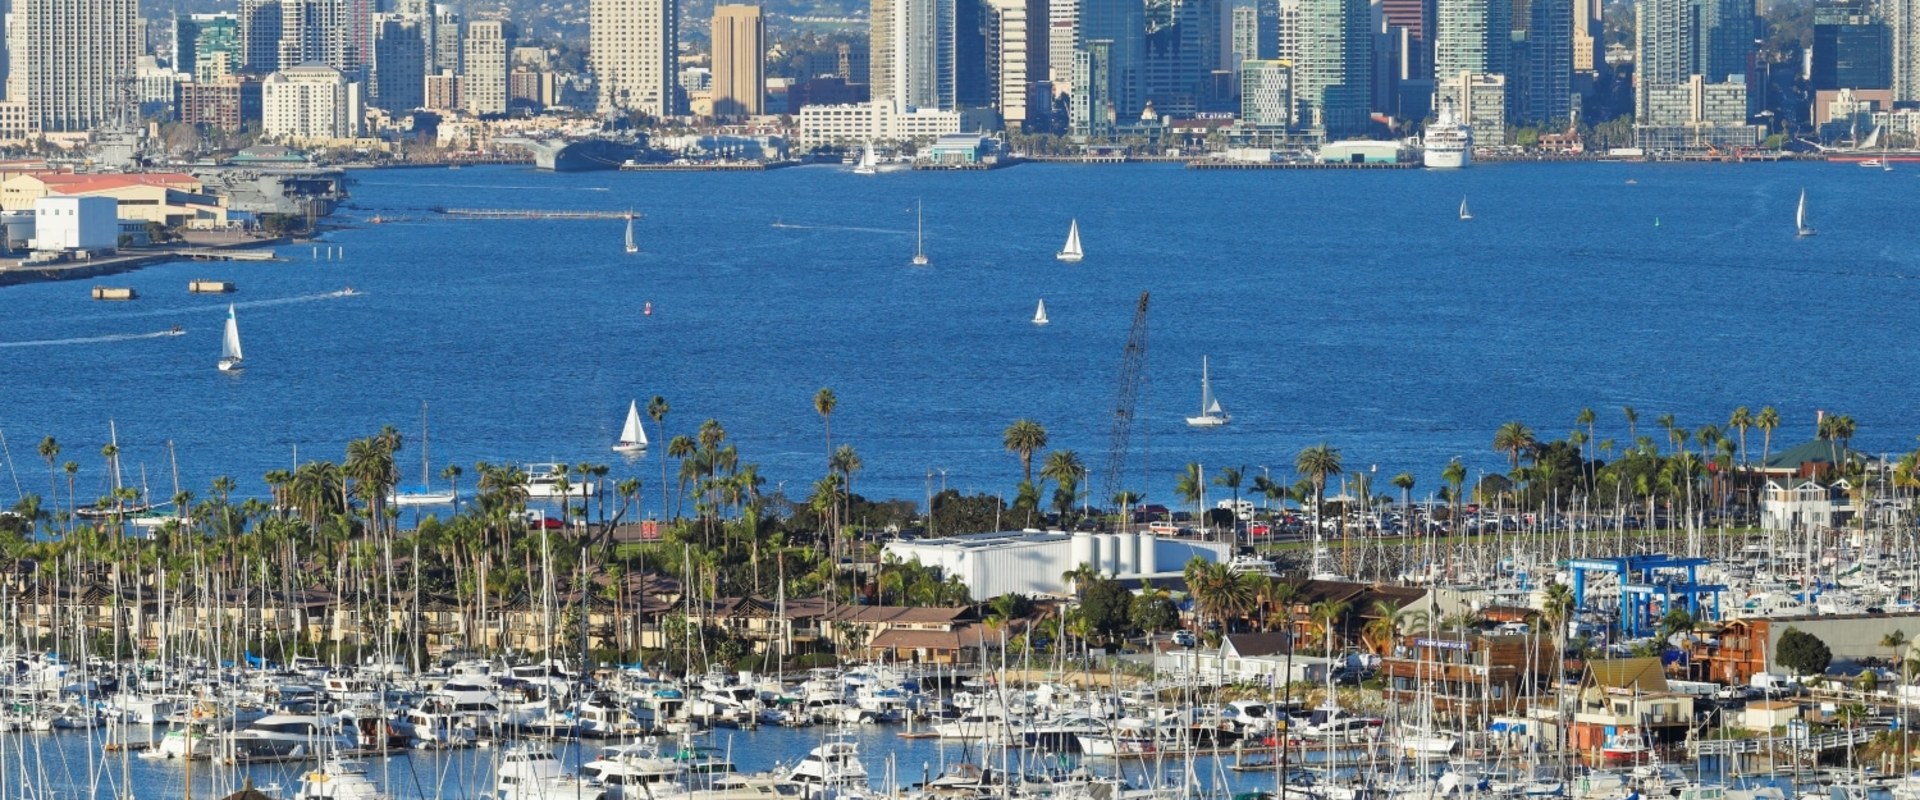 What is so great about san diego?